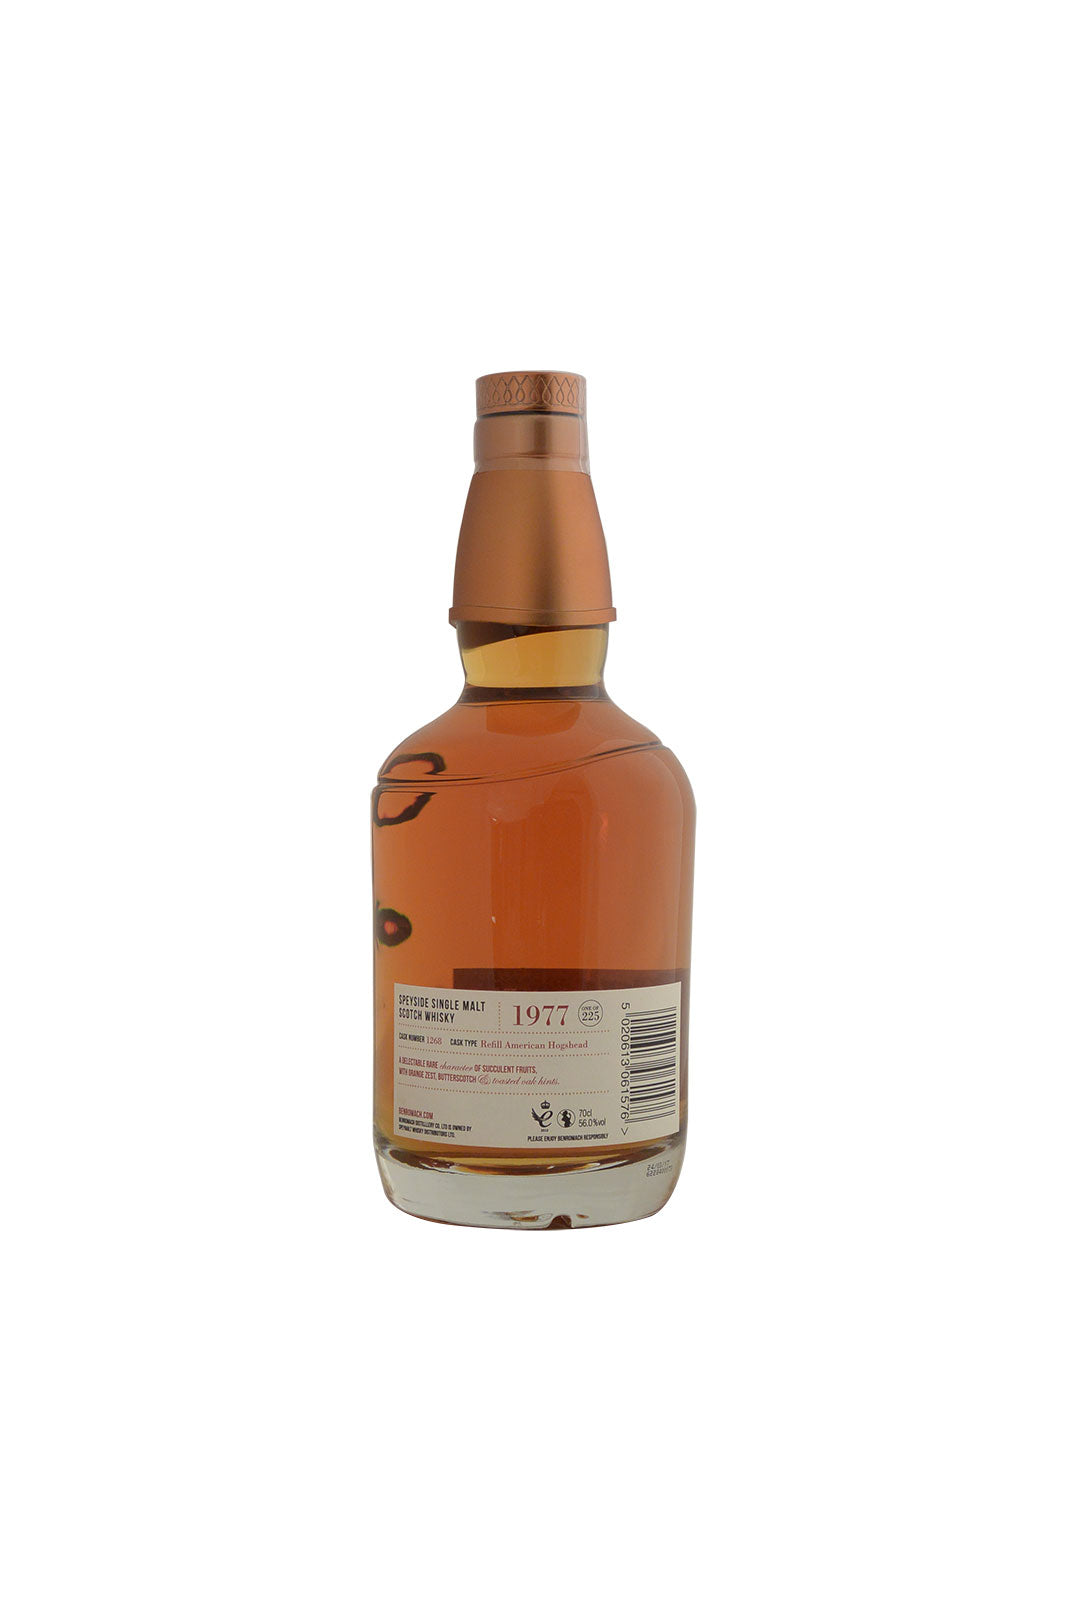 Benromach 1977 40 Year Old